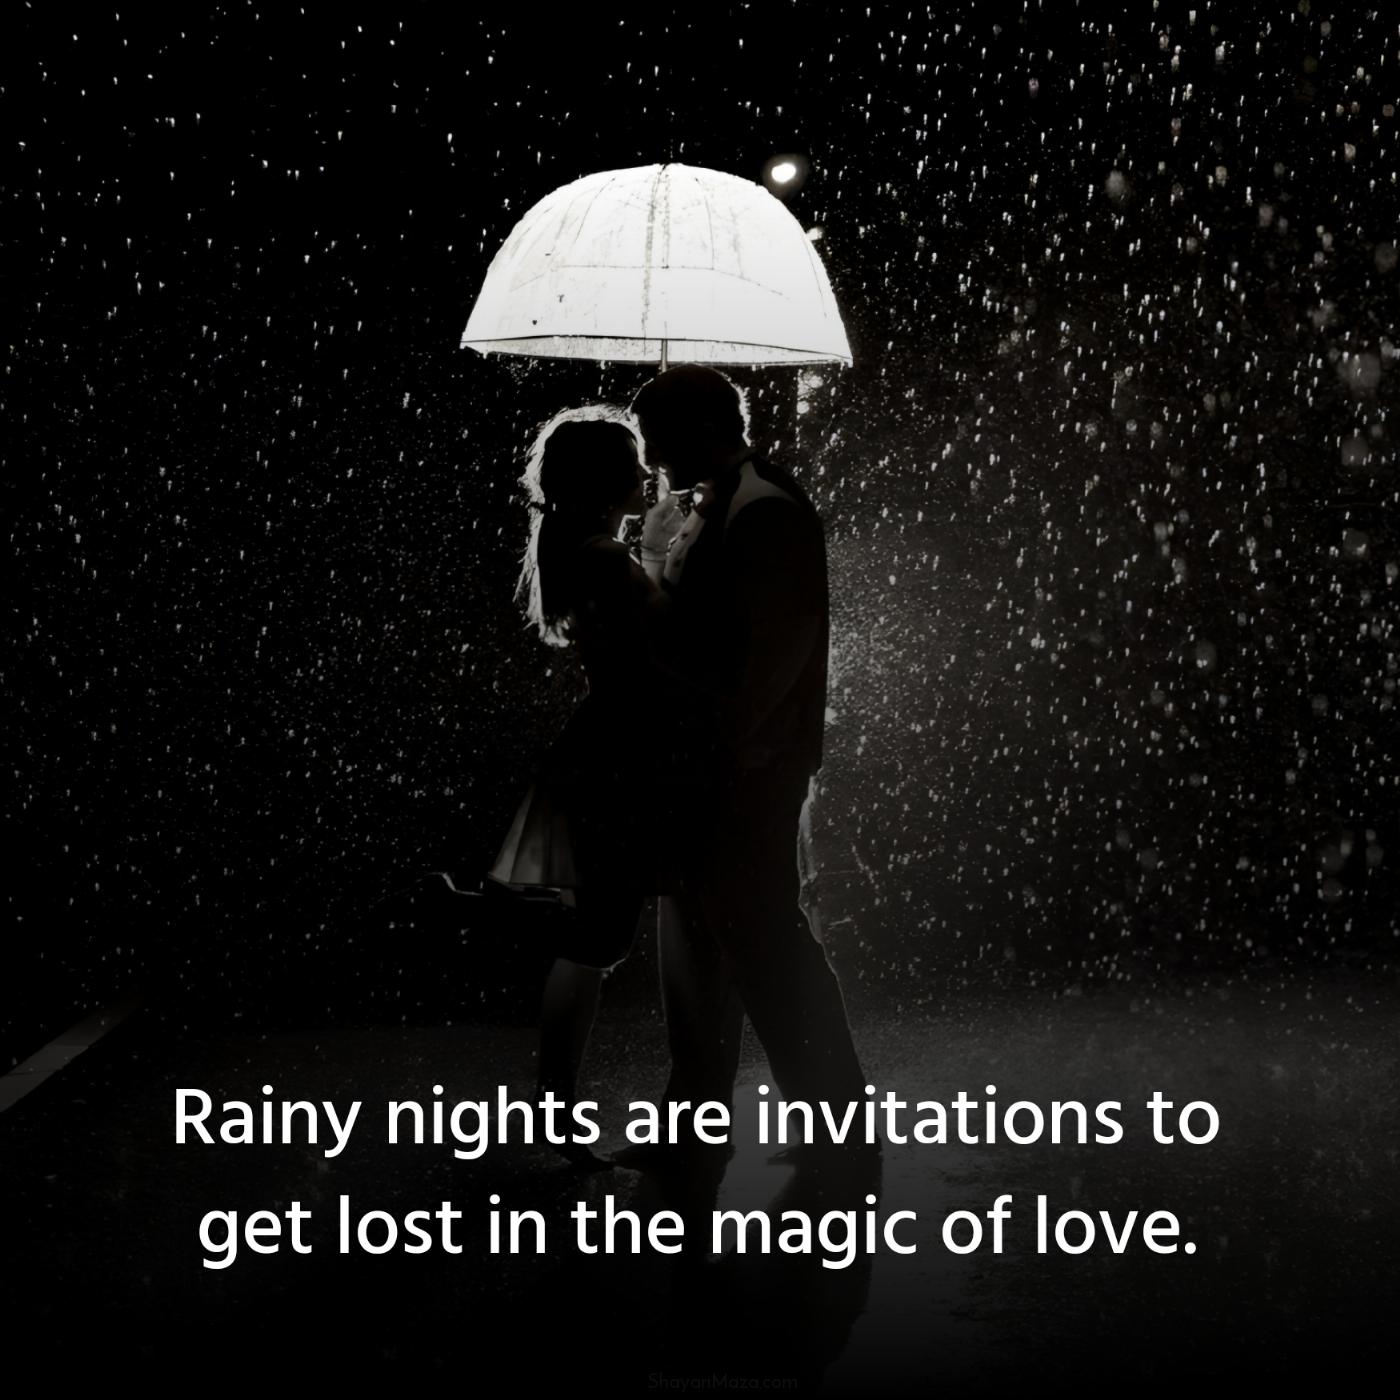 Rainy nights are invitations to get lost in the magic of love